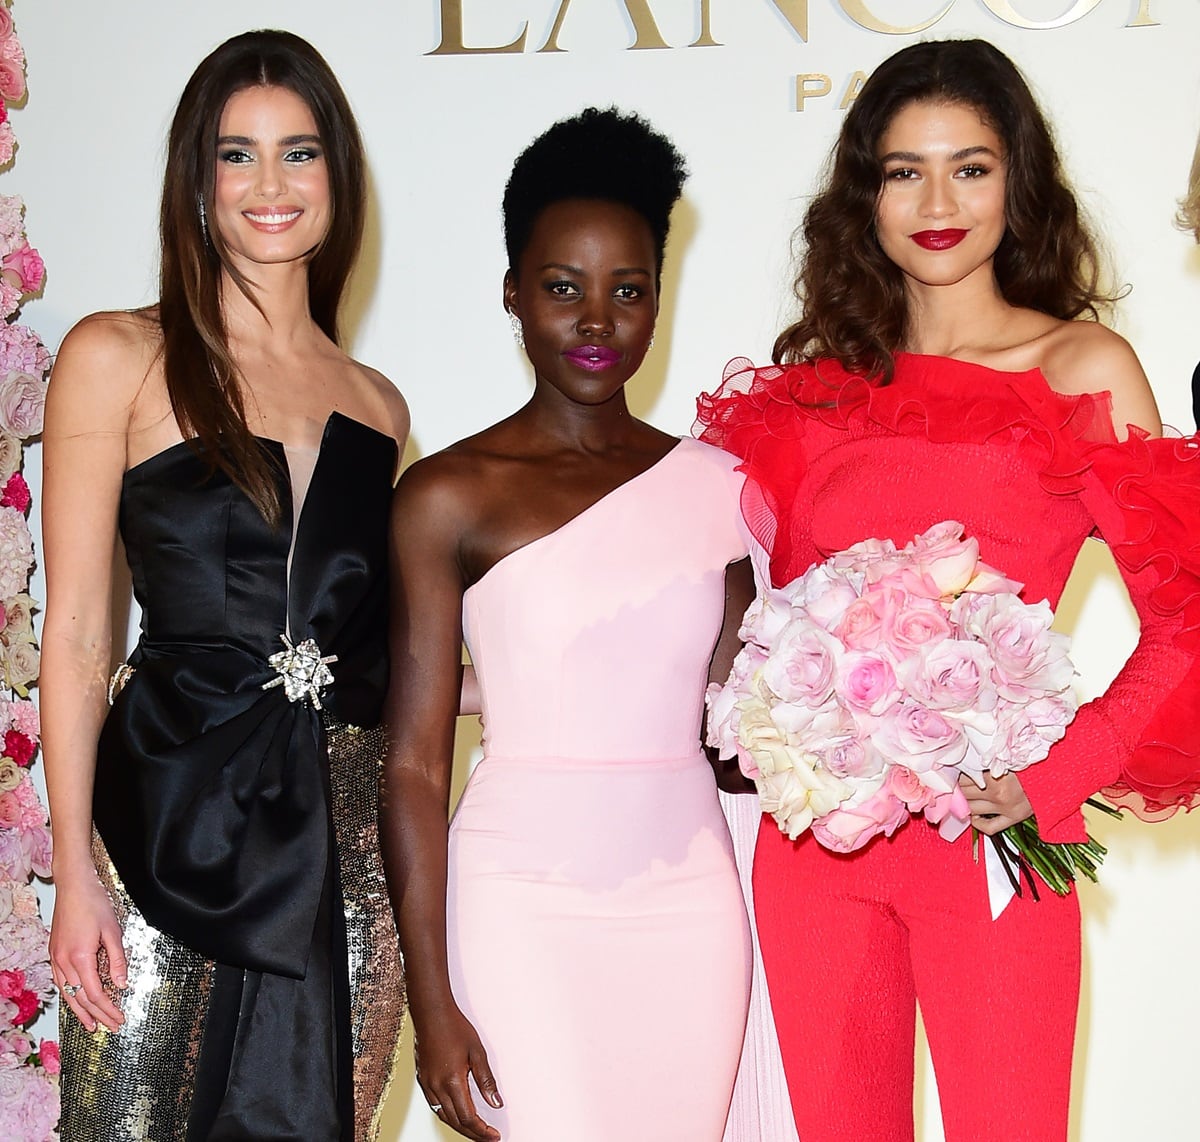 Zendaya and Taylor Marie Hill are almost the same height, with Zendaya being 5ft 8 ½ (174 cm) and Taylor being 5ft 9 (175.3 cm), making a difference of just half an inch (1.3 cm) between them, while Lupita Nyong'o is the shortest among the three at 5ft 3 ¾ (161.9 cm), making a difference of approximately 4 inches (10.1 cm) between her and Taylor Marie Hill, who is the tallest